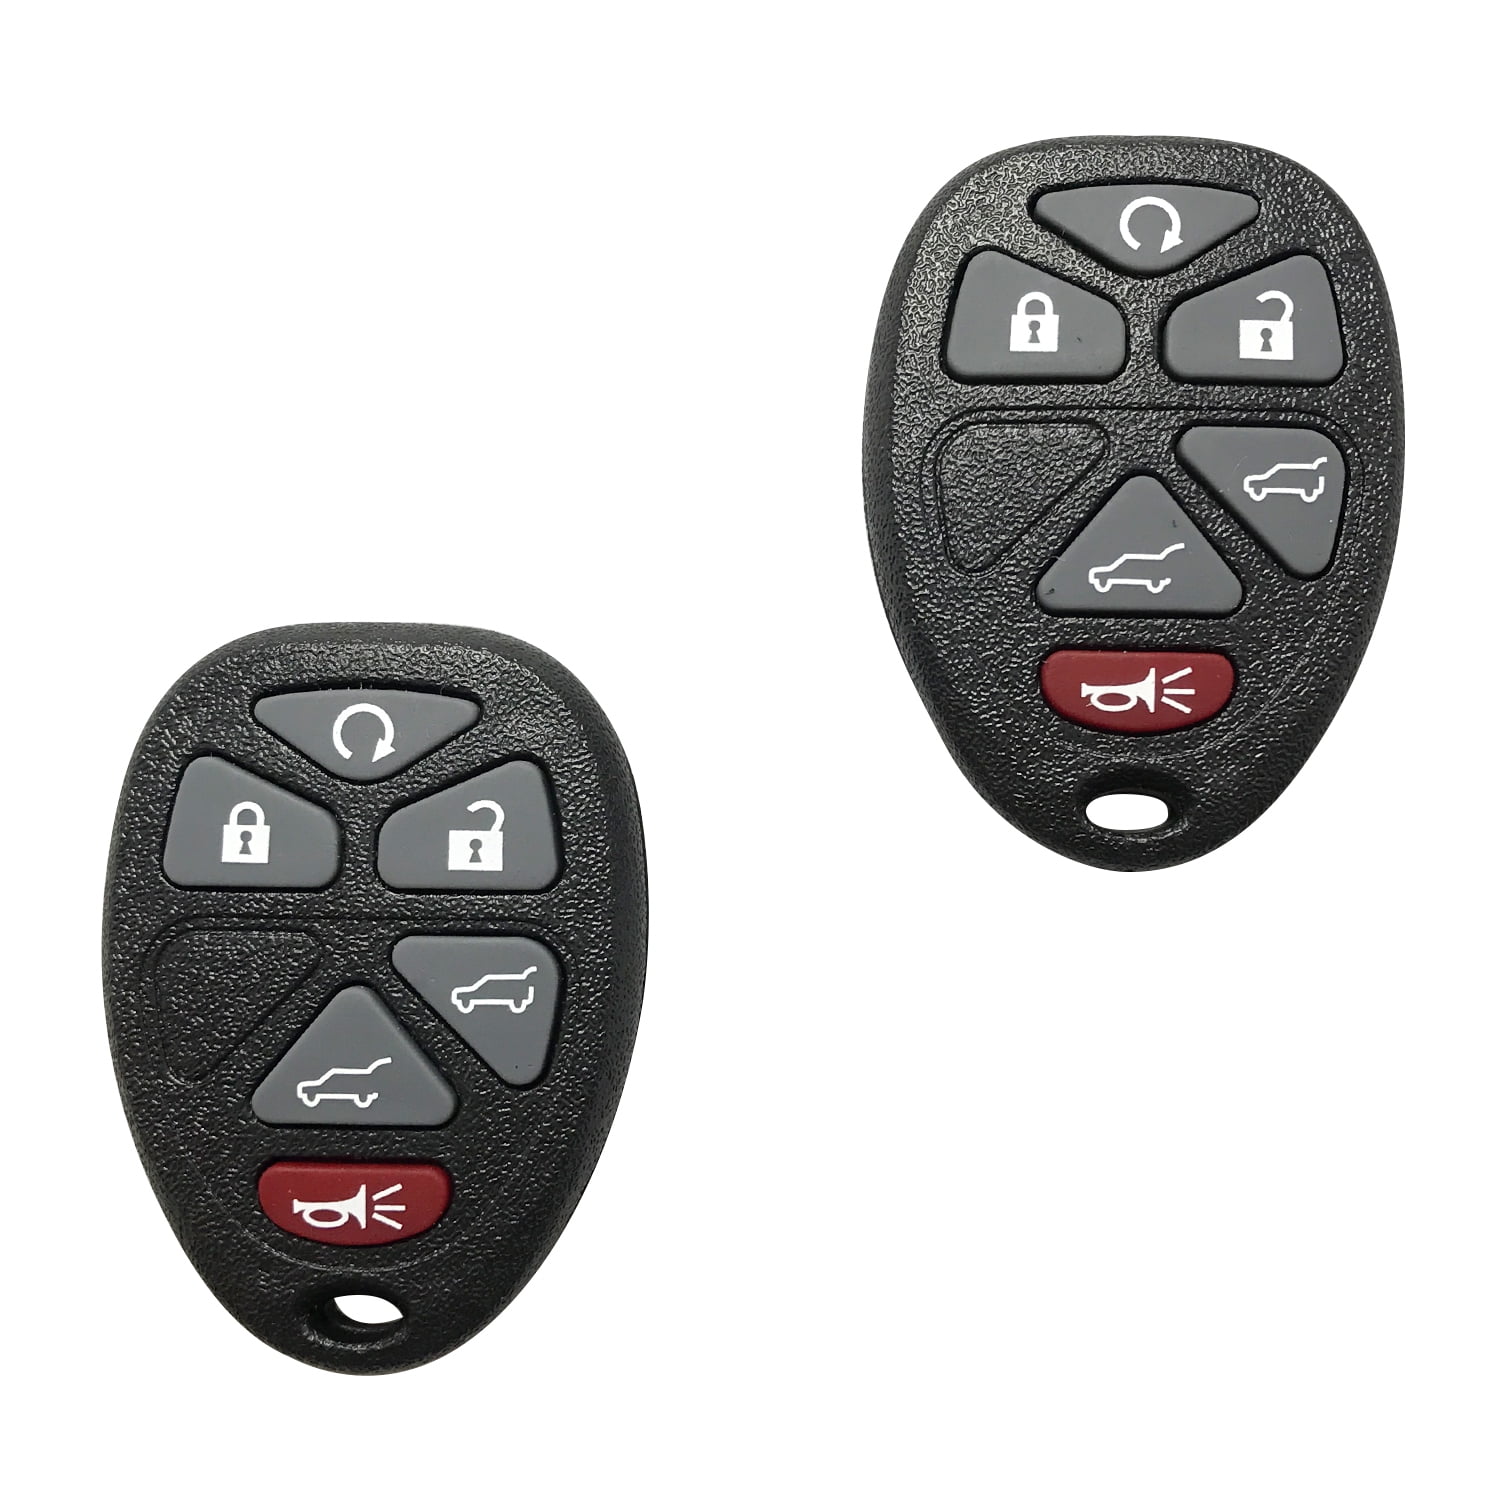 2 Keyless Entry Remote Control Car Key Fob Fit 2007-2014 TAHOE CHEVY OUC60270 